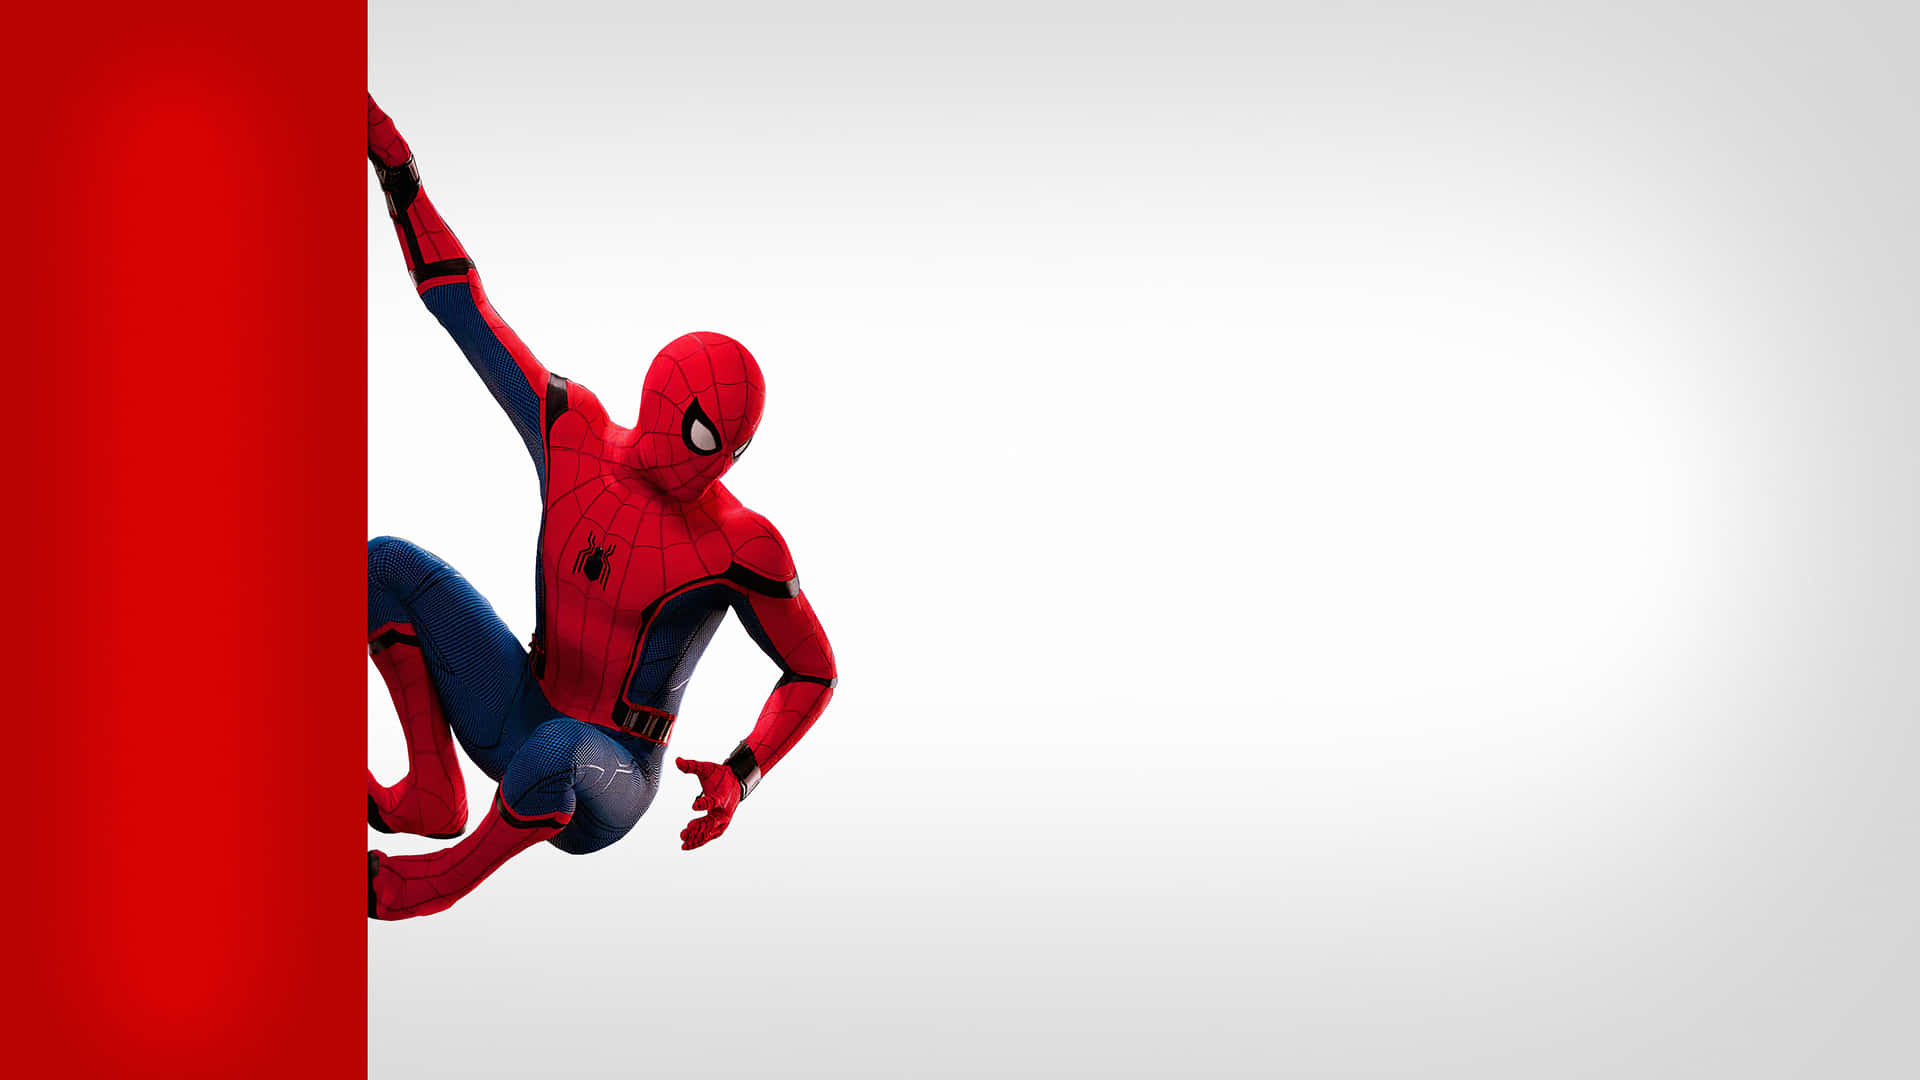 Spiderman On The Red Lateral Wall Wallpaper